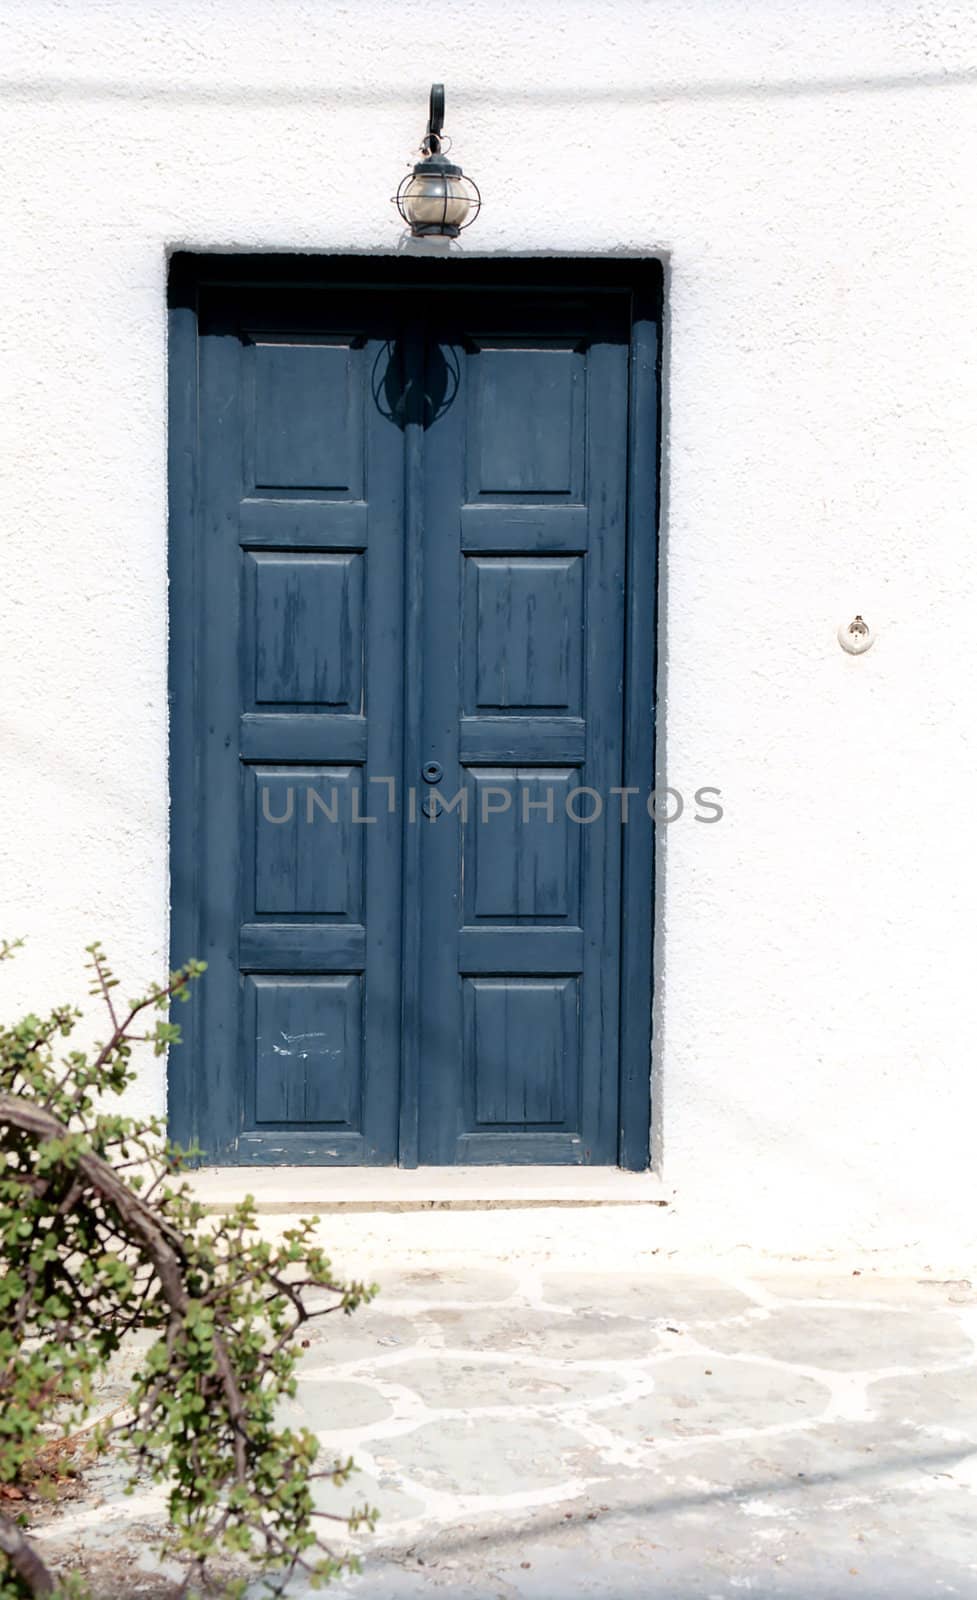 Fragment of a house with blue door